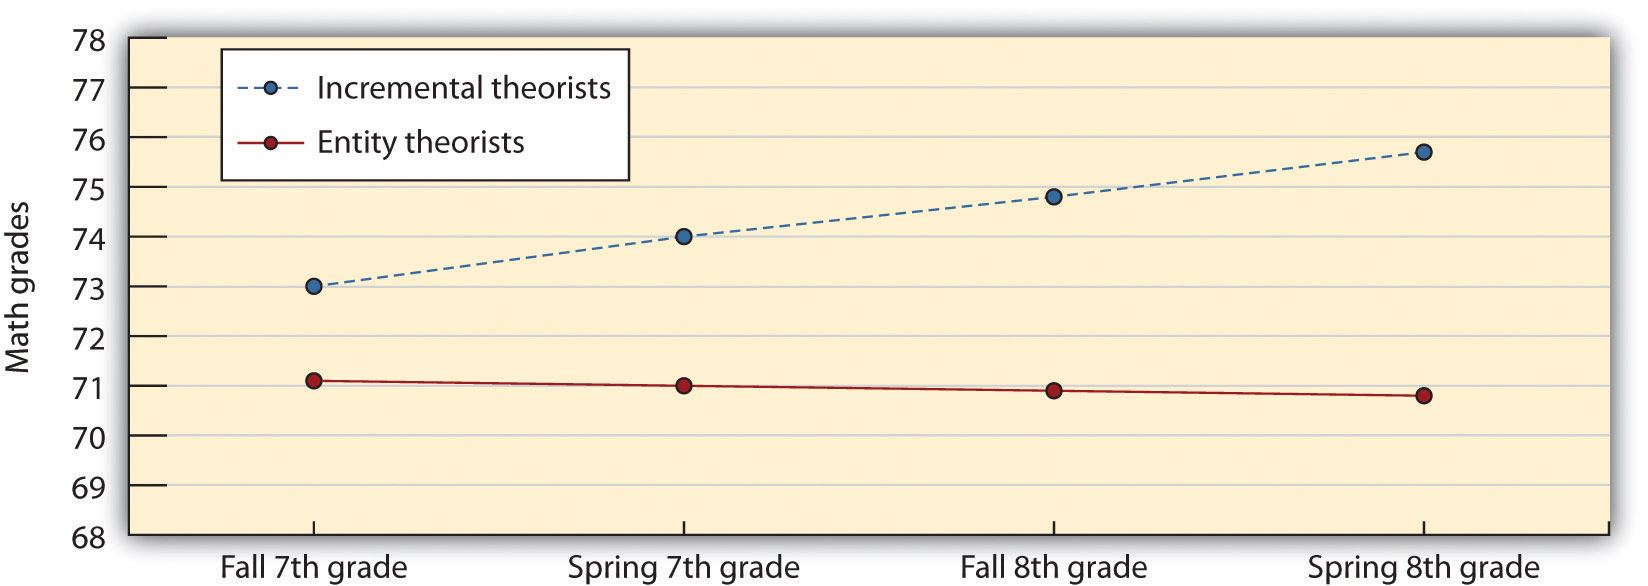 ncremental theorists' math grades increase from fall 7th grade to spring 8th grade, whereas entity theorists' grades remain nearly the same.